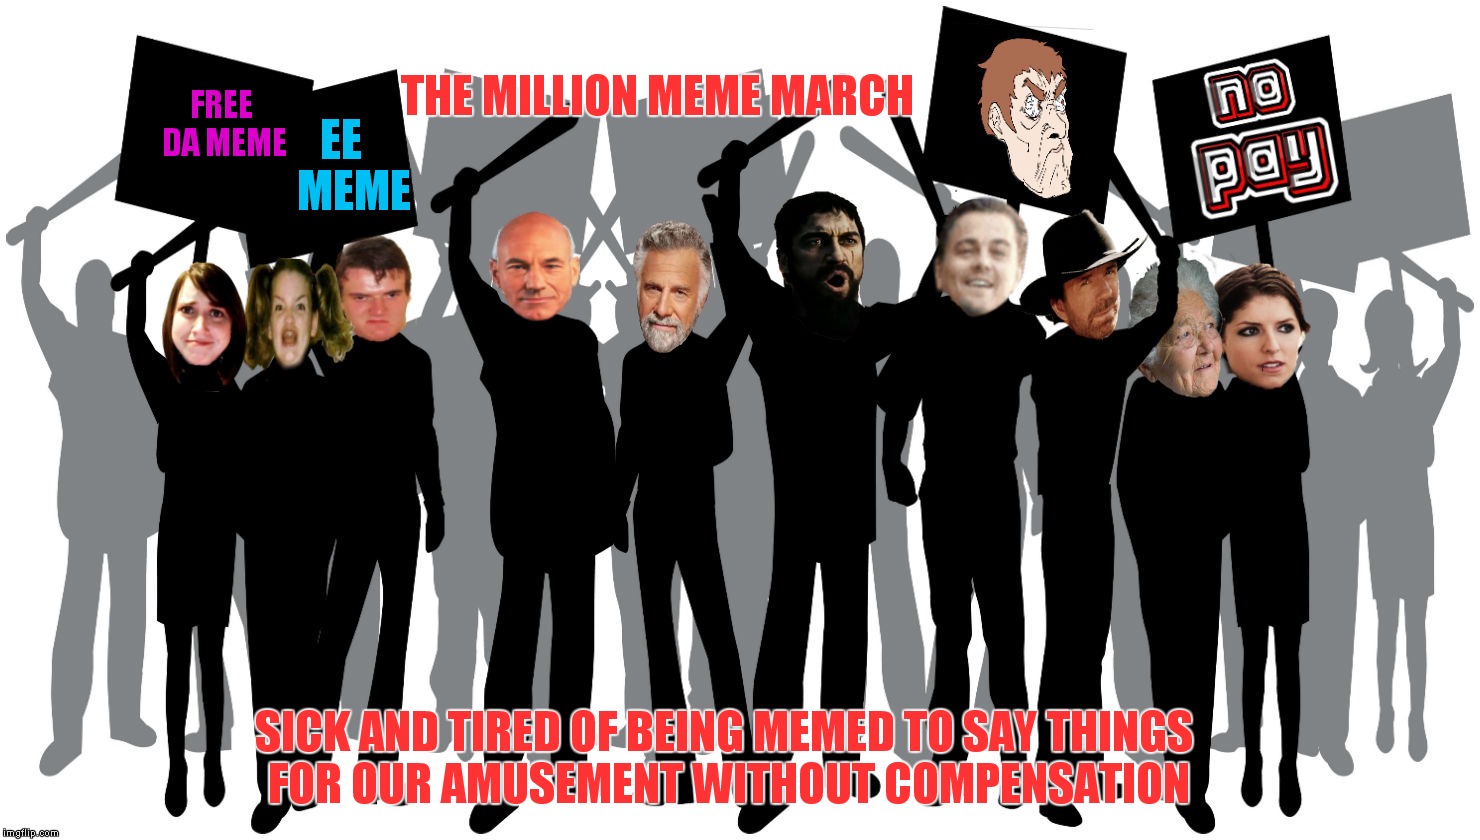 I knew this might happen someday.... |  THE MILLION MEME MARCH; EE       MEME; FREE DA MEME; SICK AND TIRED OF BEING MEMED TO SAY THINGS FOR OUR AMUSEMENT WITHOUT COMPENSATION | image tagged in million meme march,political meme,funnymemes,strike,equal rights | made w/ Imgflip meme maker